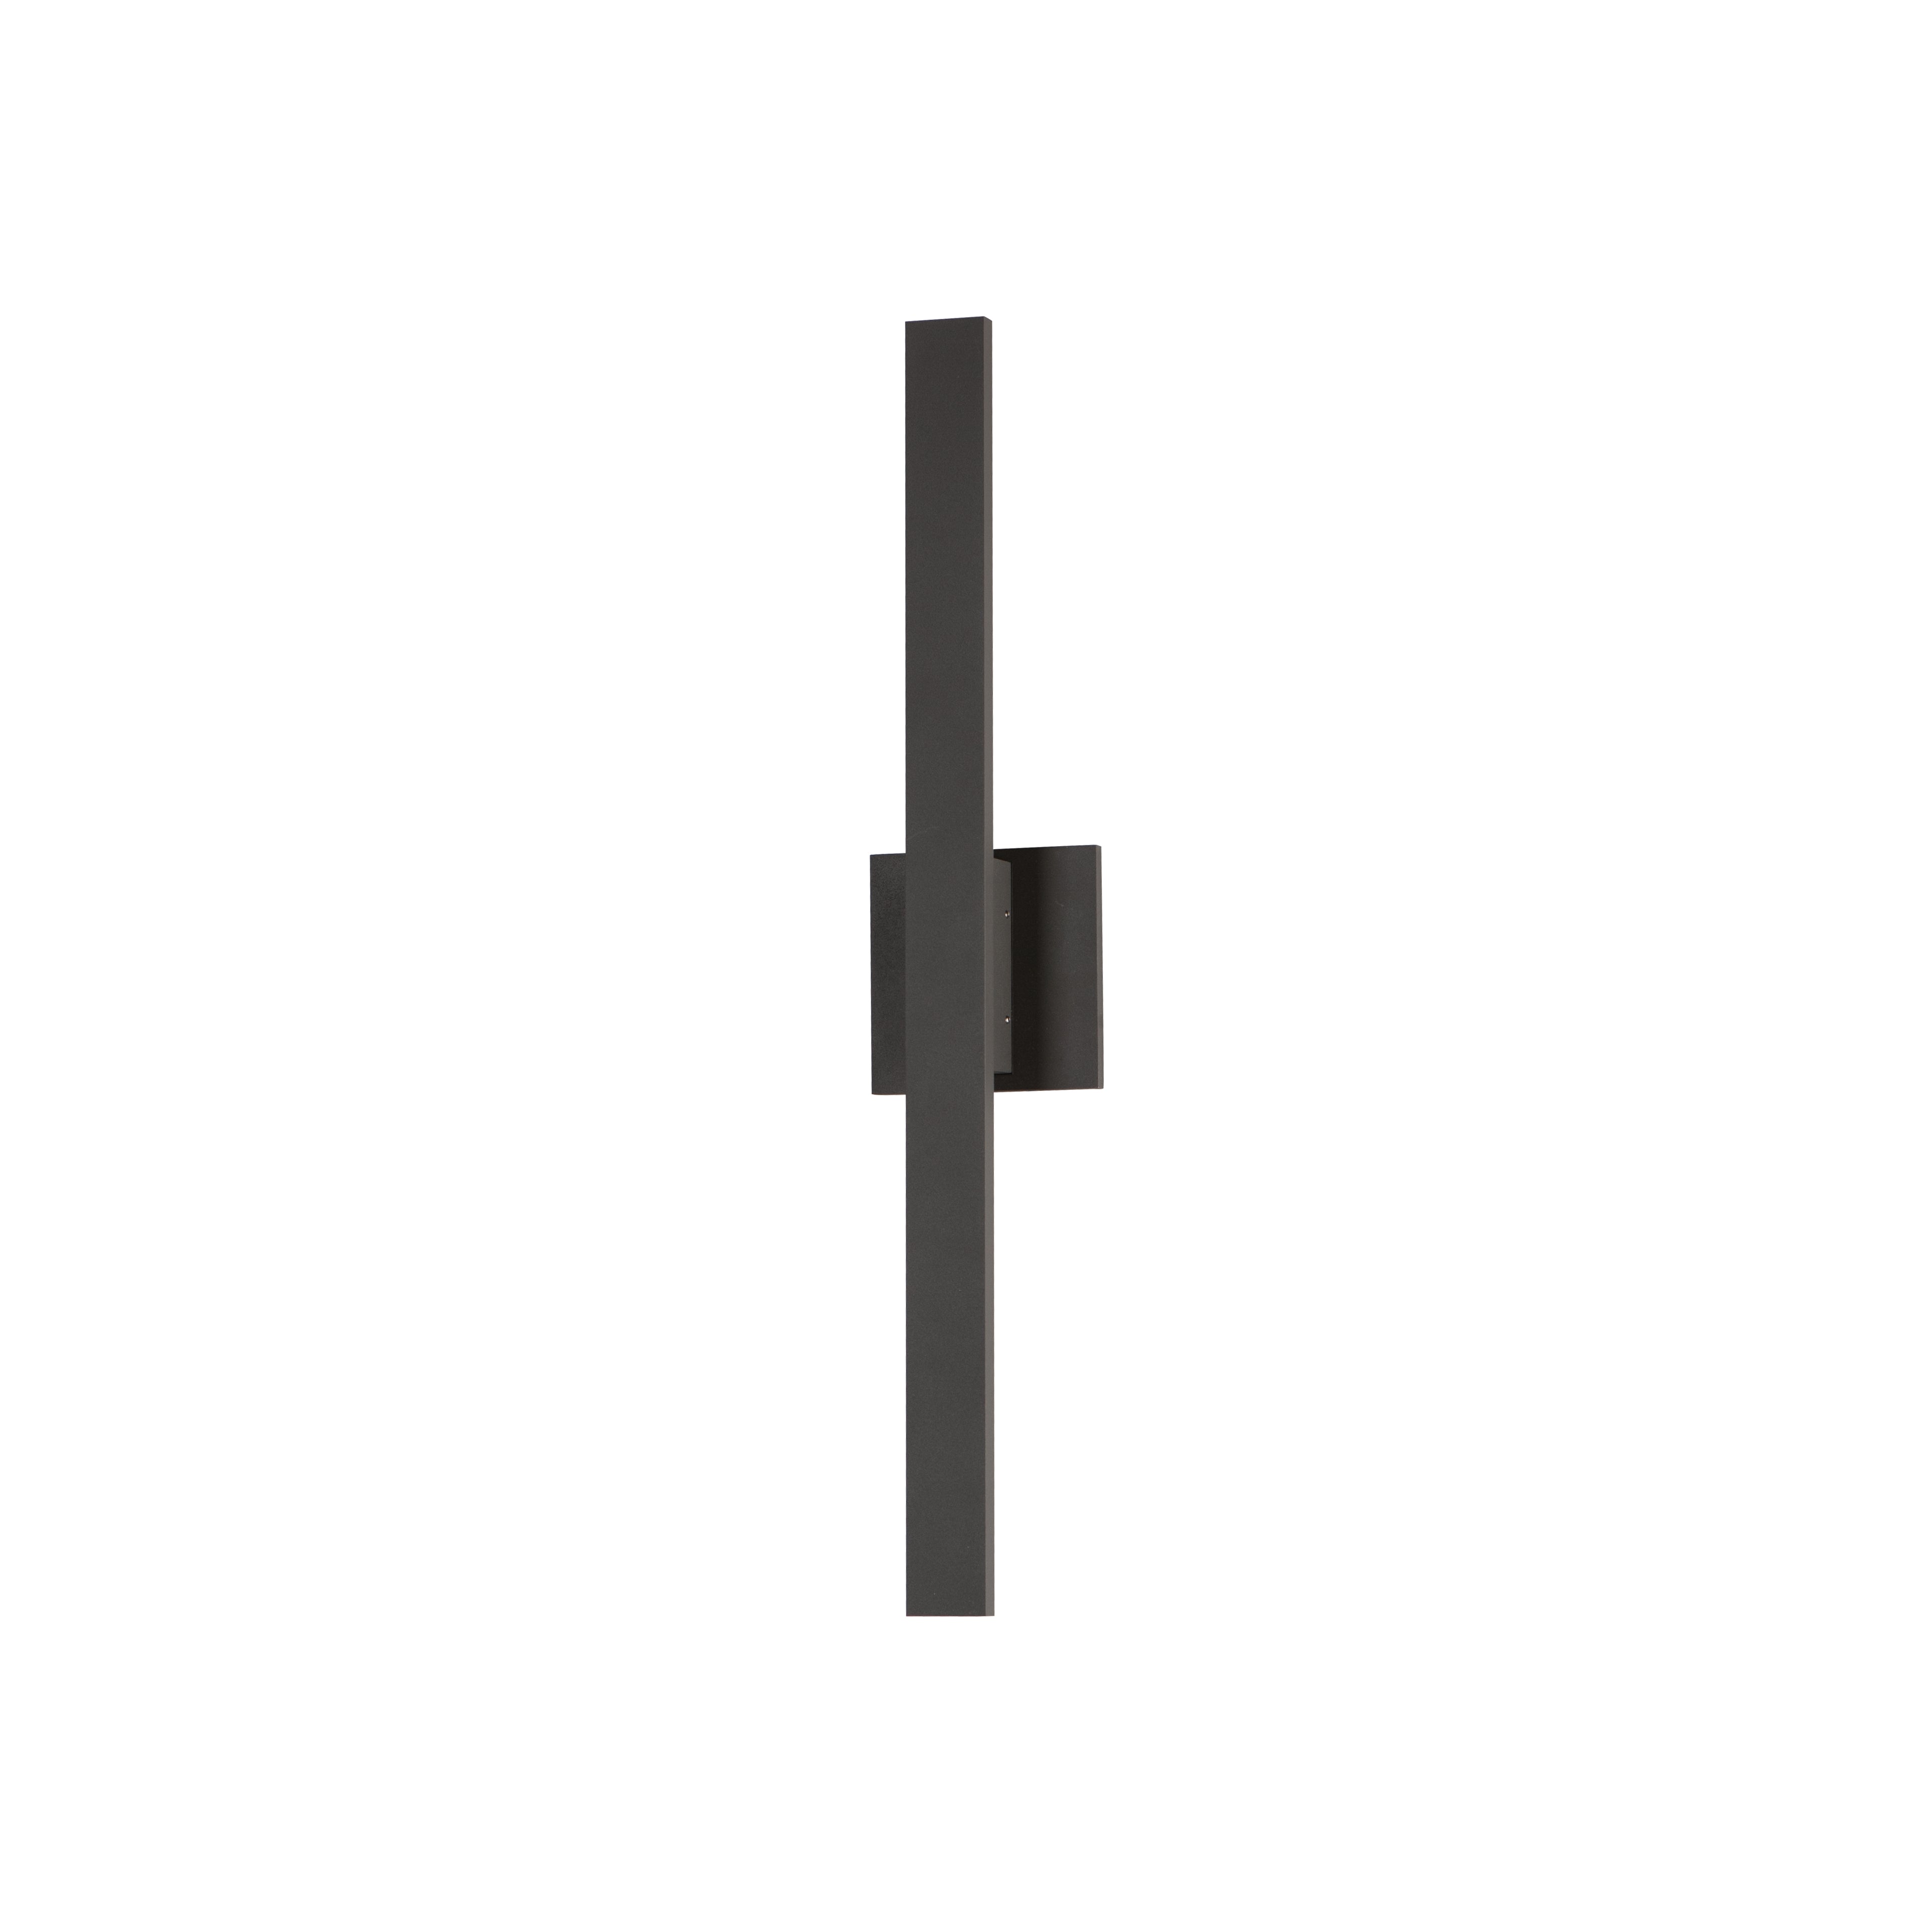 ALUMI LUX LINE Outdoor wall sconce Bronze INTEGRATED LED - E41343-BZ | MAXIM/ET3